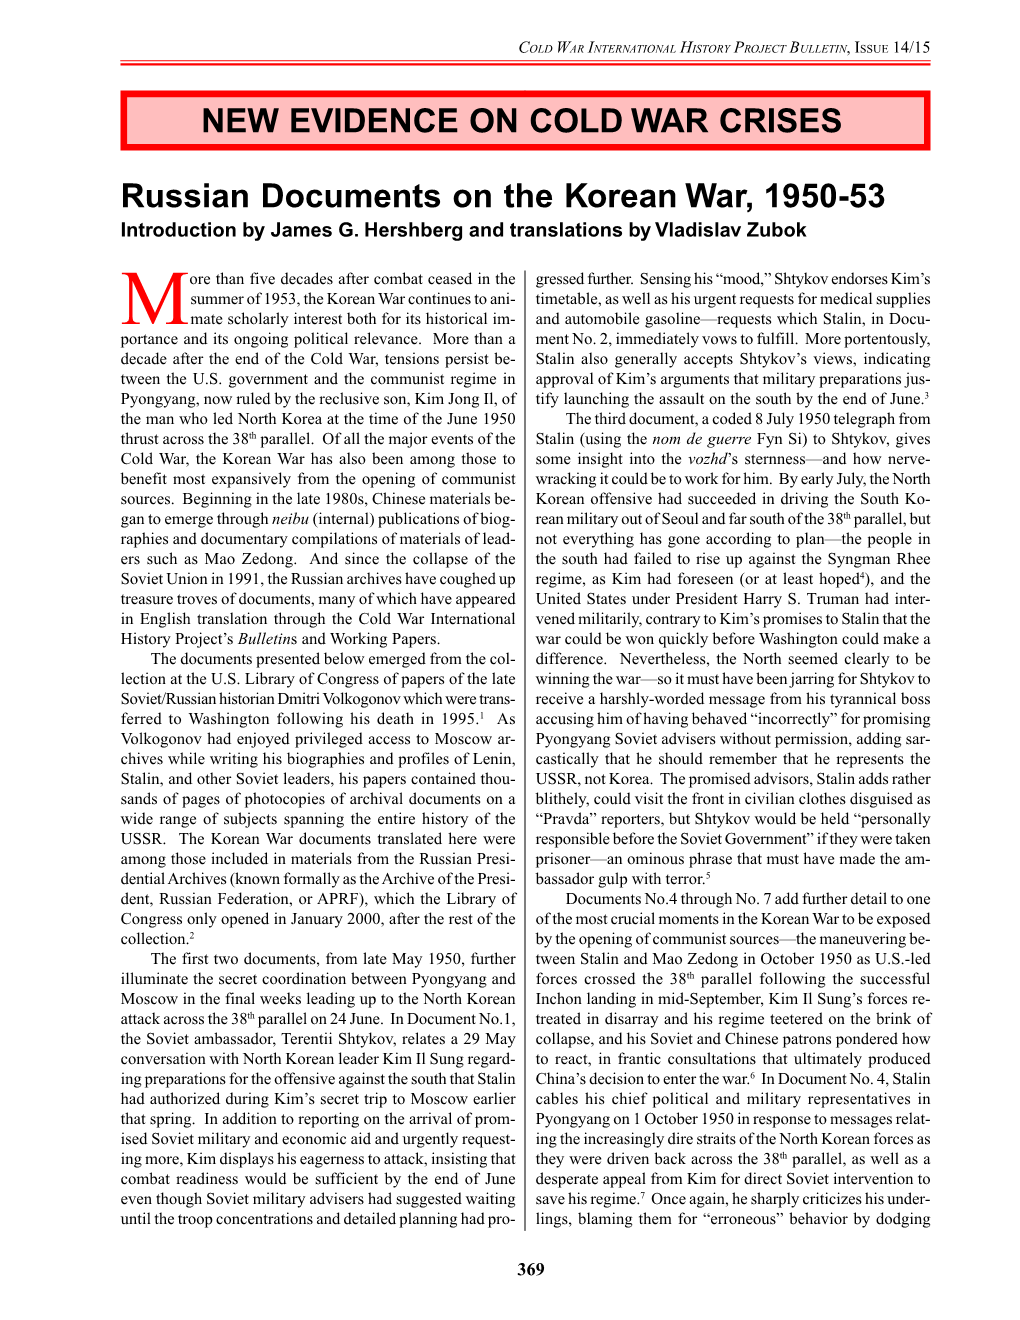 NEW EVIDENCE on COLD WAR CRISES Russian Documents on the Korean War, 1950-53